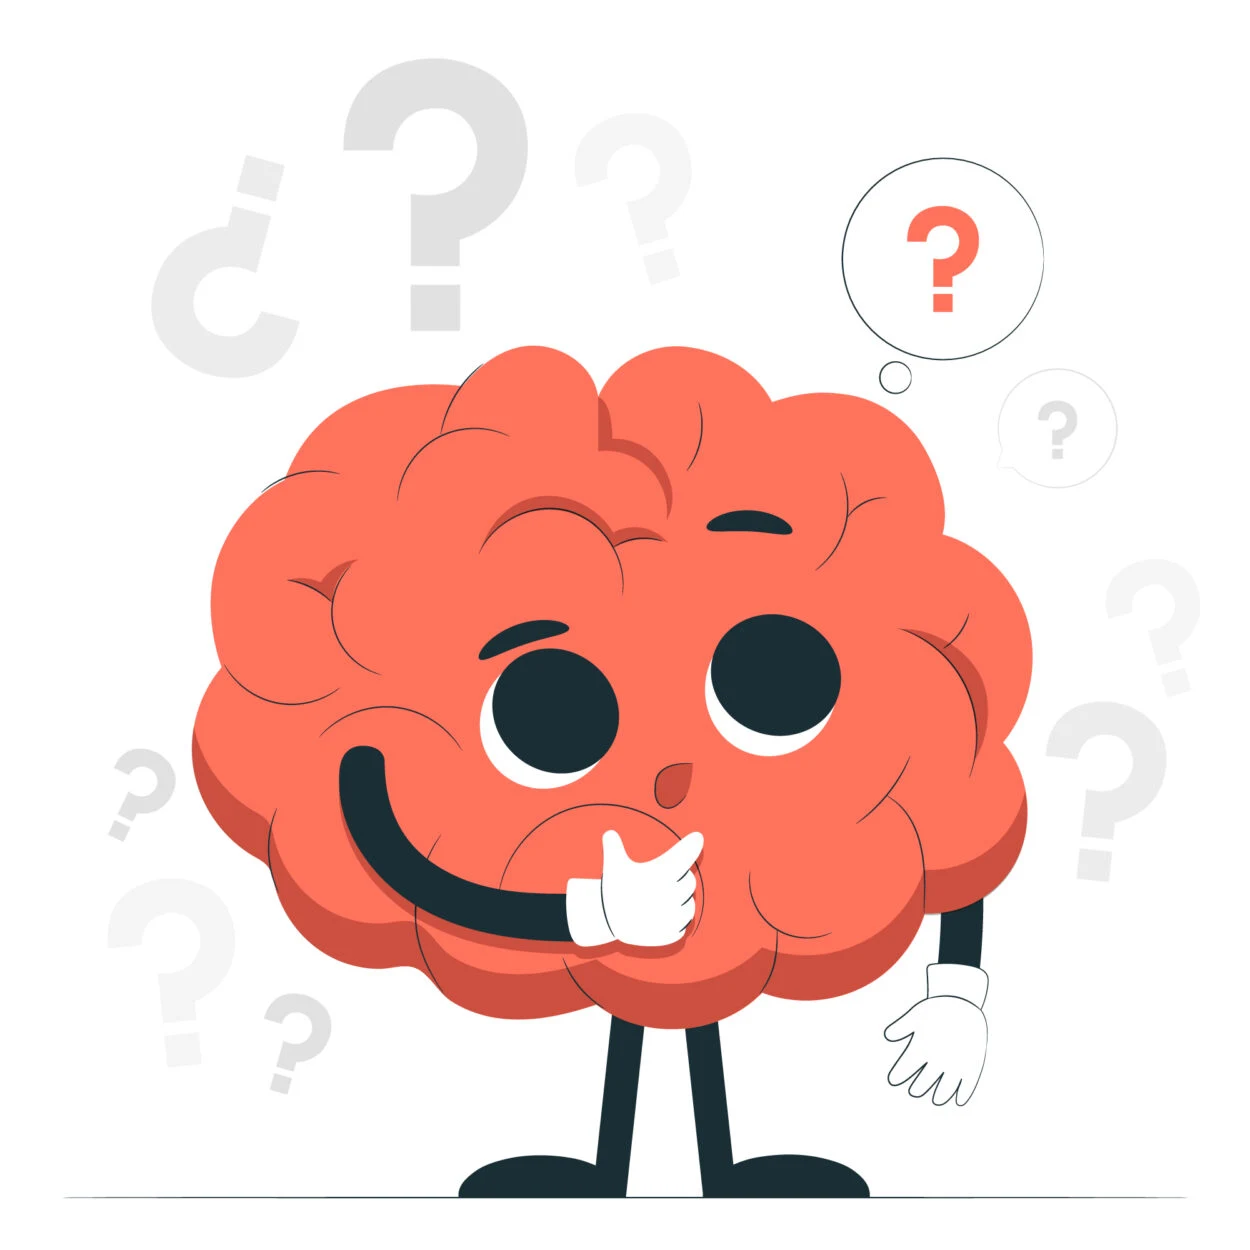 A brain wondering something with question marks in background